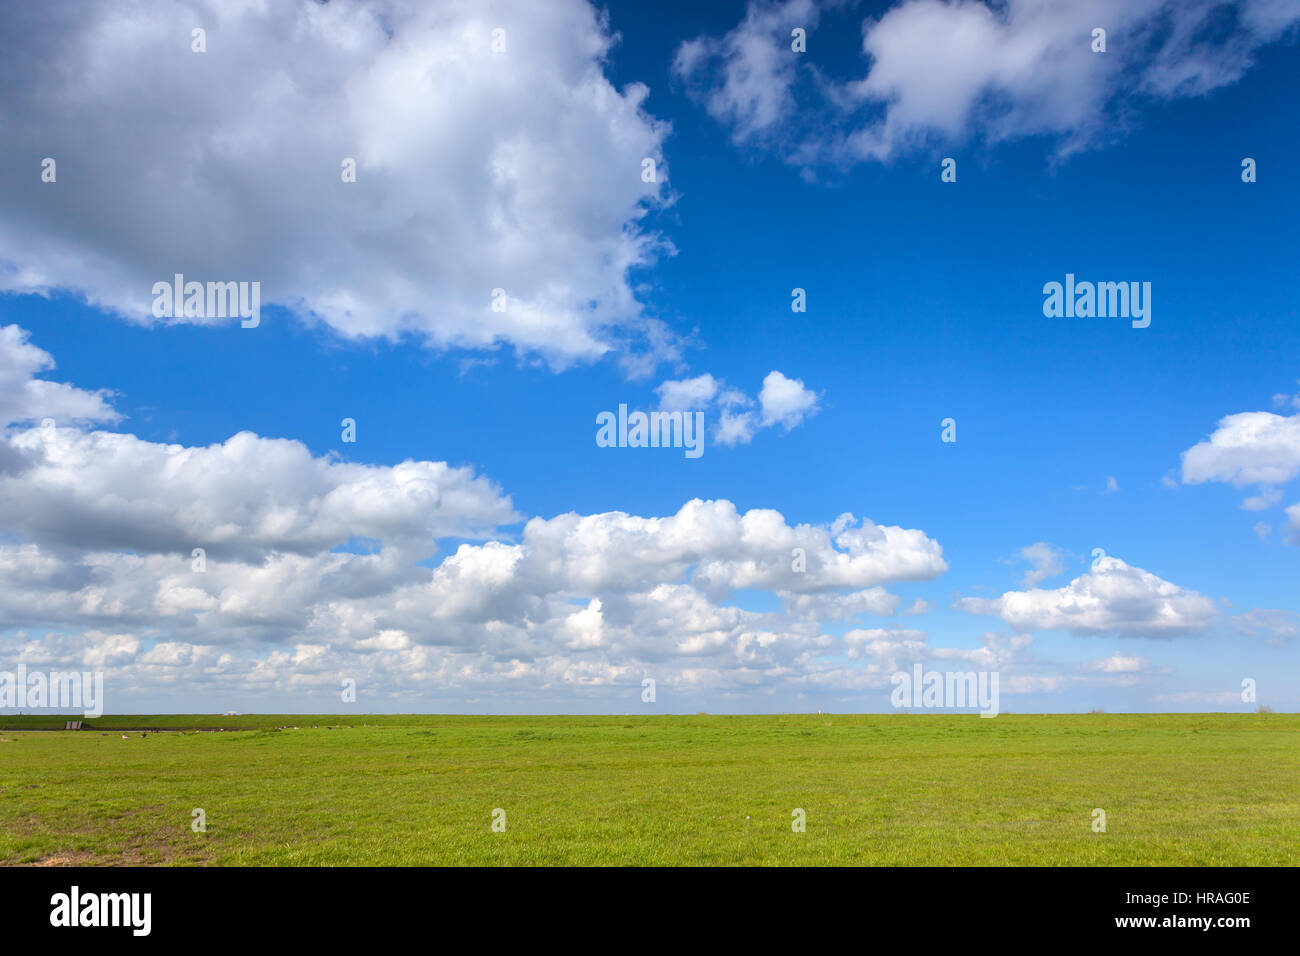 Beautiful landscape with green grass field and bright blue sky with clouds at sunset in spring. Colorful nature background. Agriculture. Green meadow Stock Photo